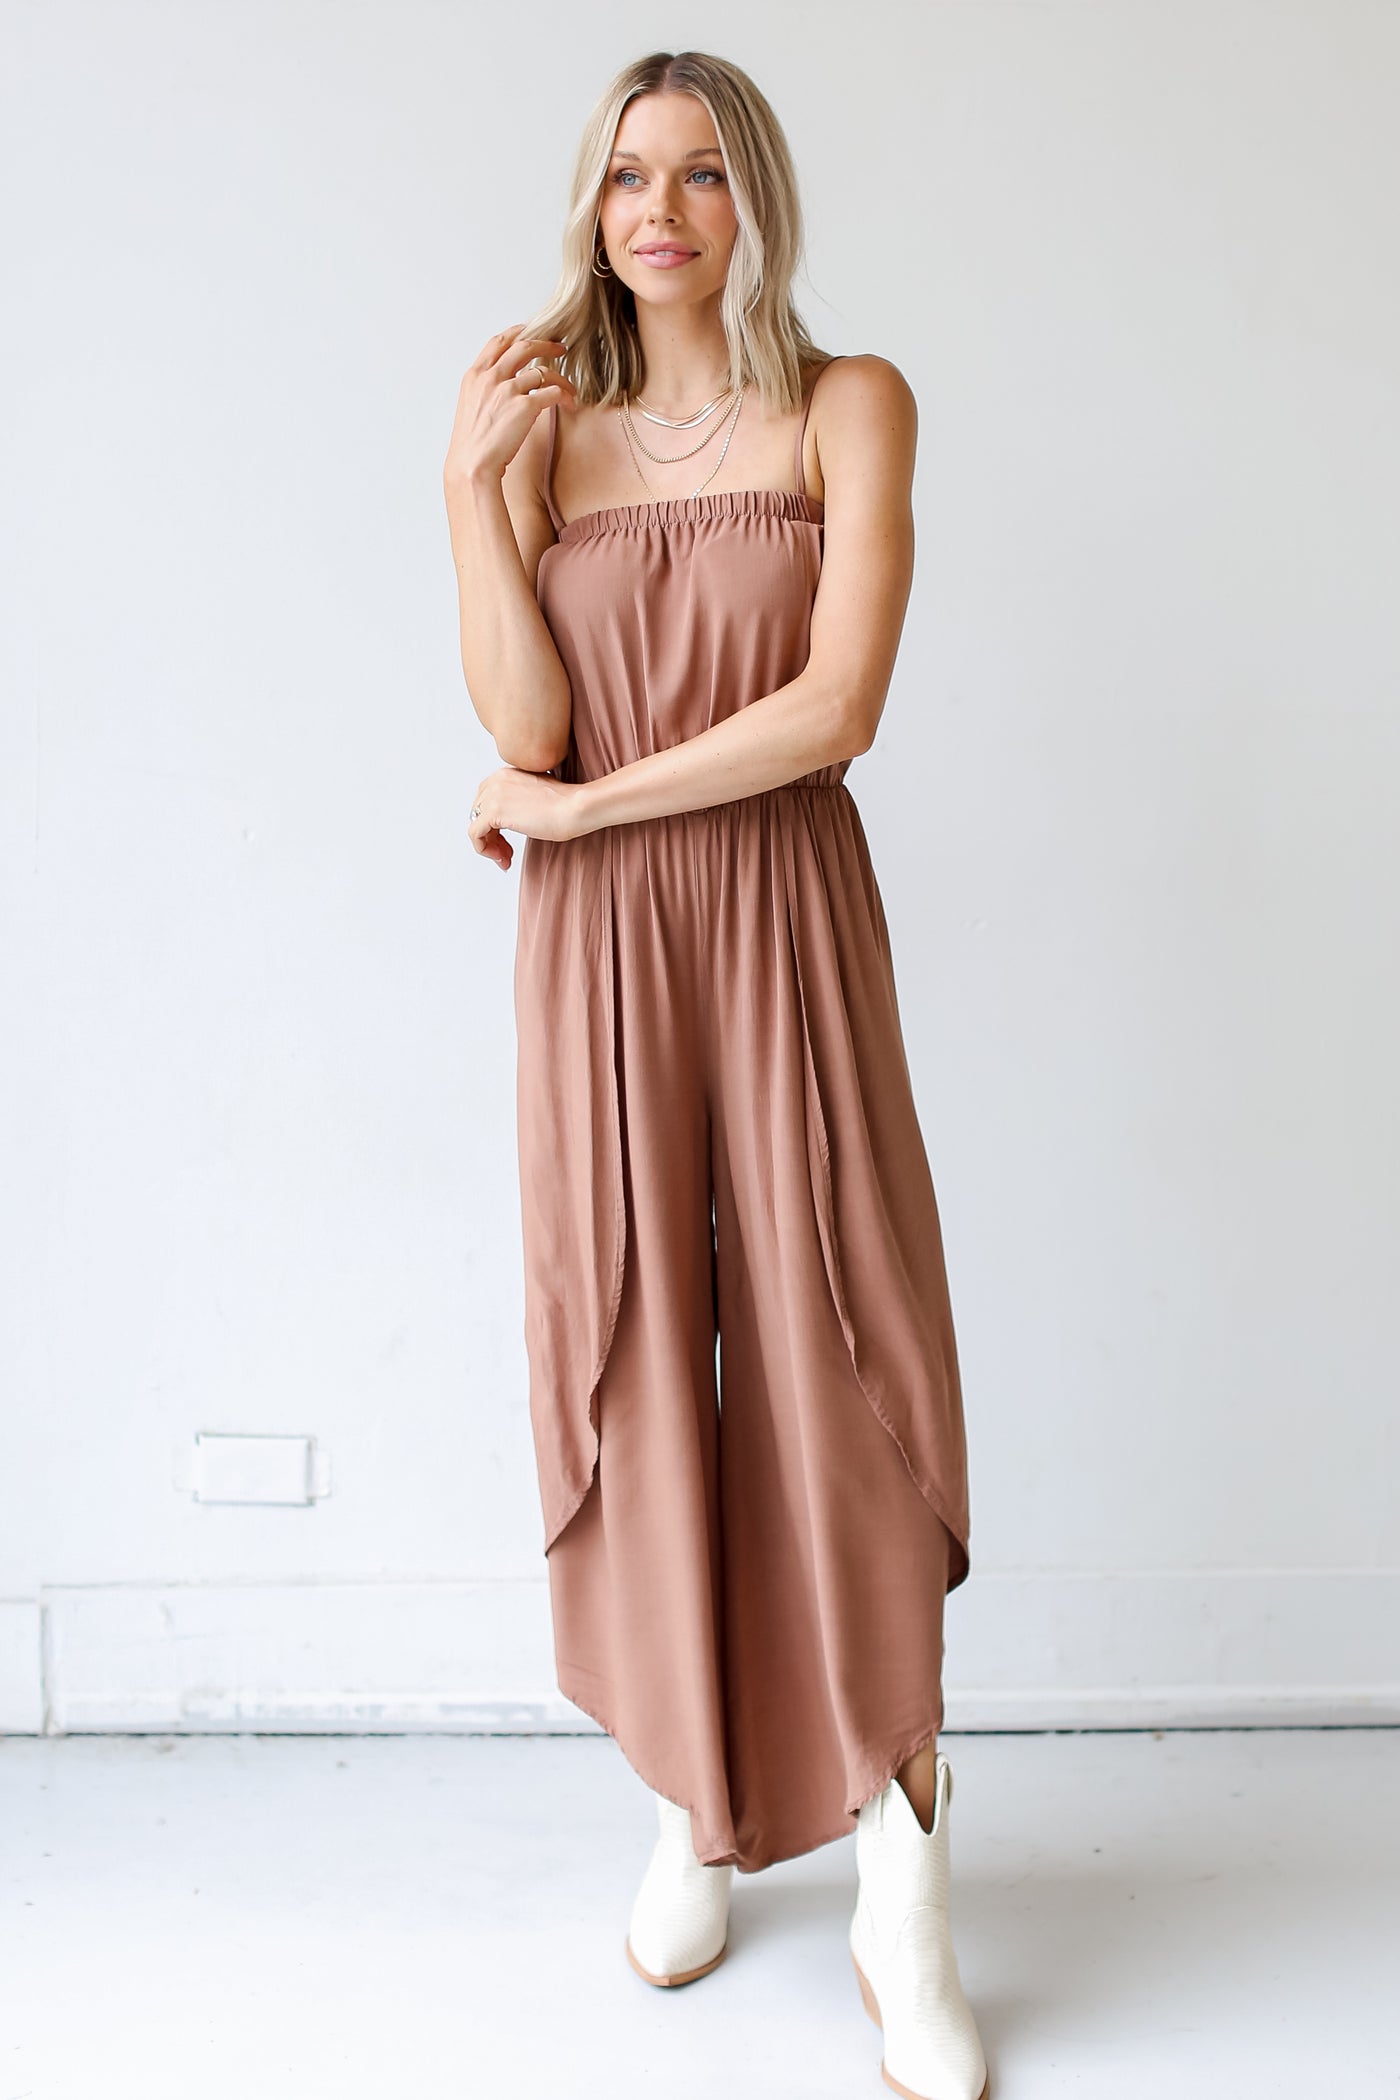 model wearing a brown Jumpsuit with white boots